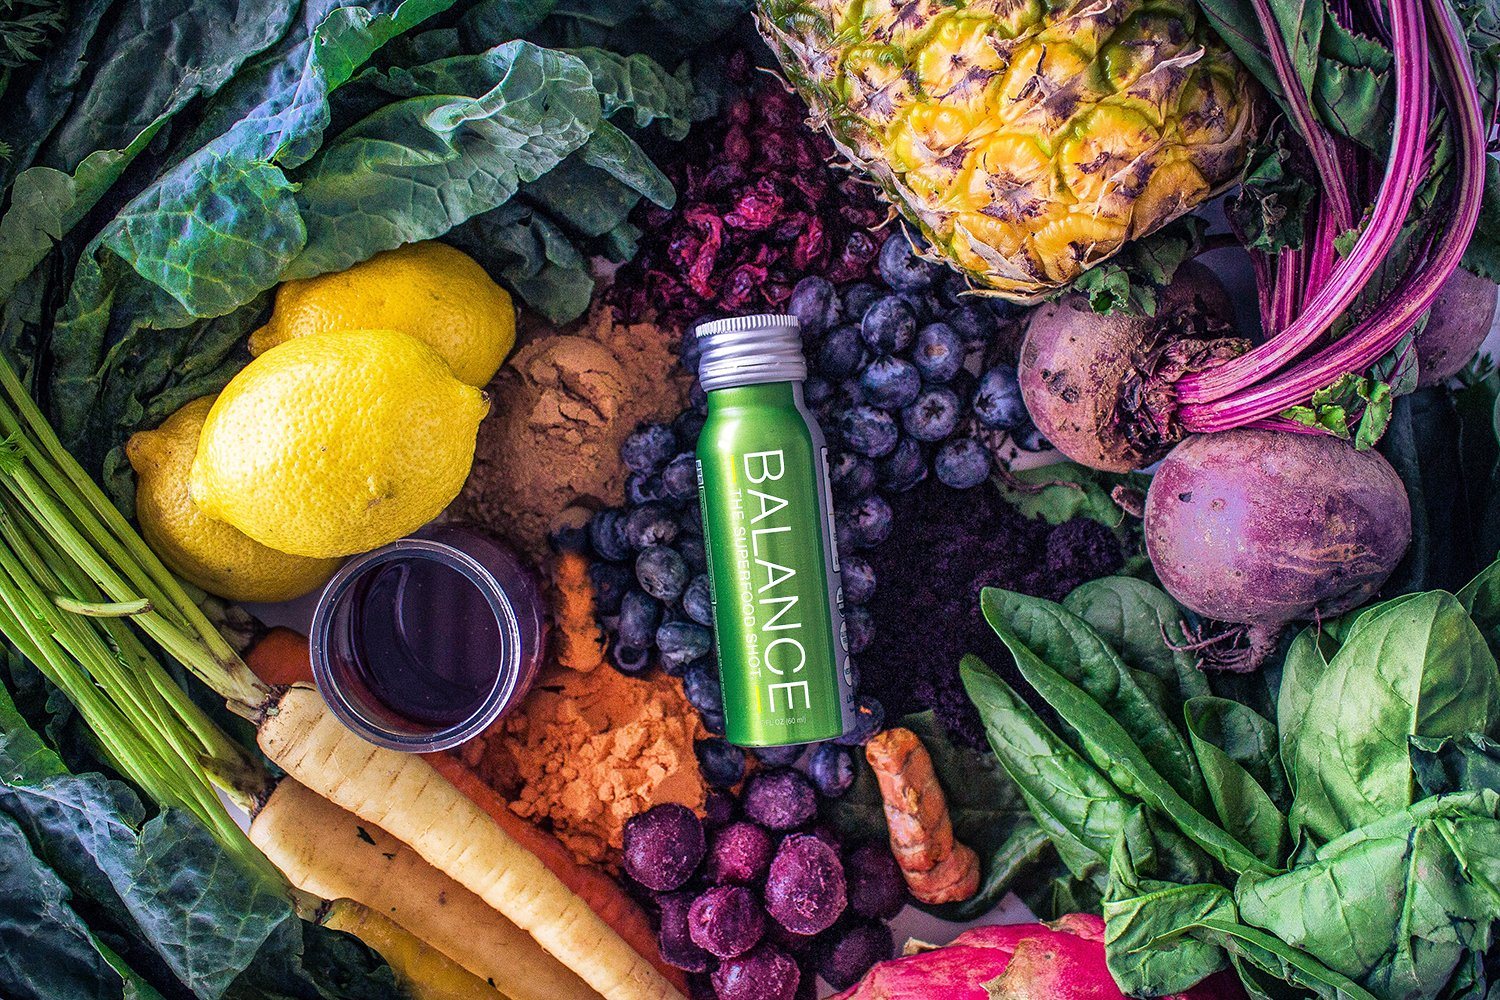 Life Equals rebrands to Balance the Superfood Shot